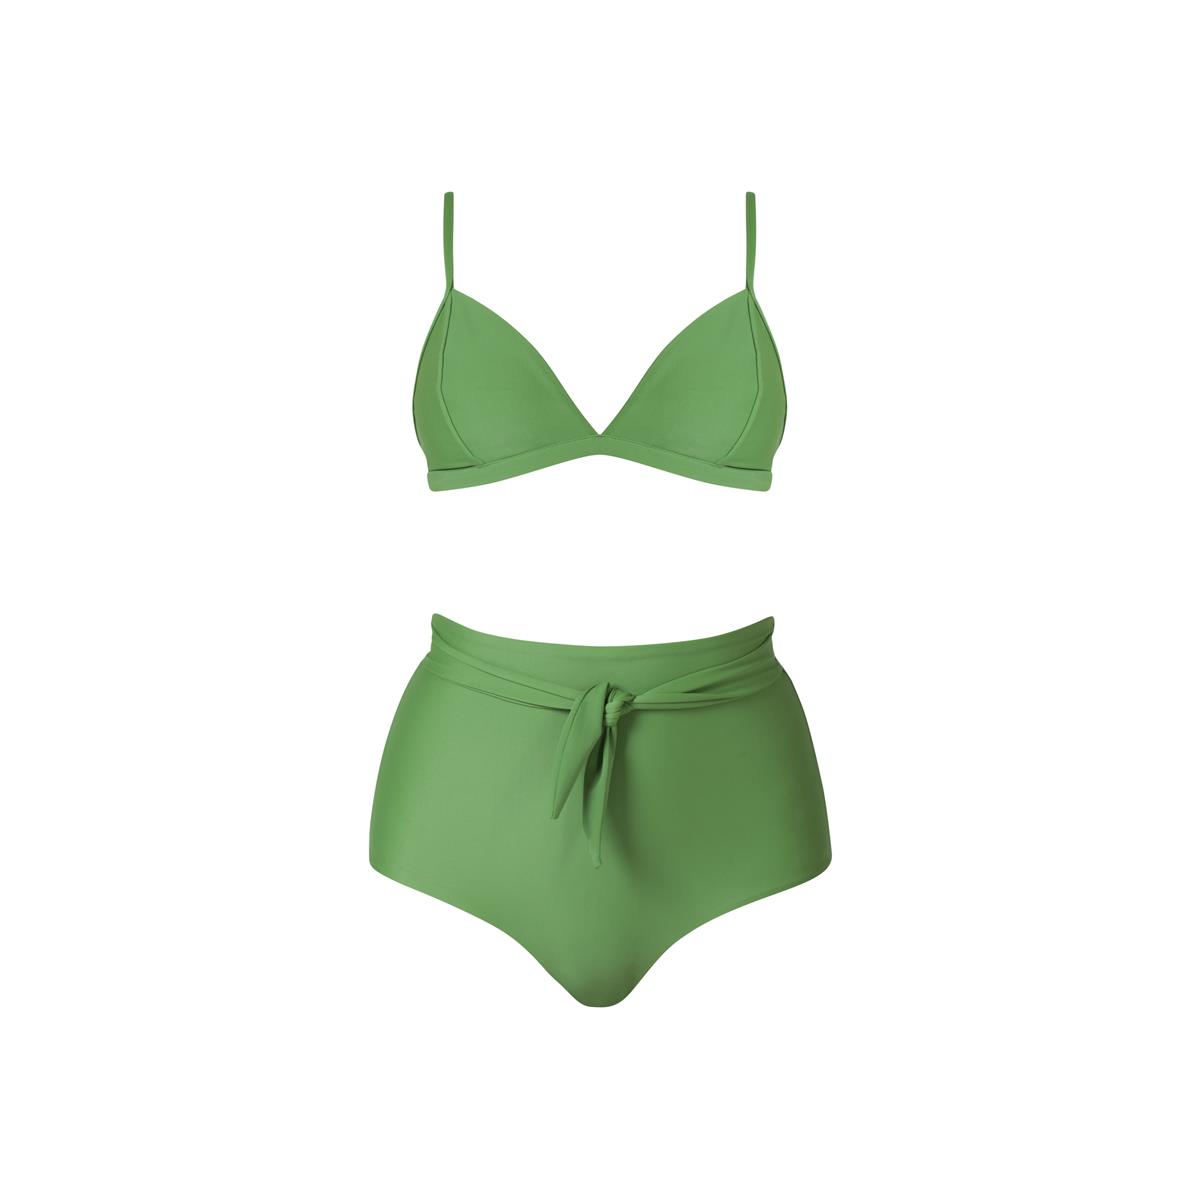 MARGARET AND HERMIONE_SS18_Top No.4_green_EUR 94_Bottom No.4_green_EUR 92,00